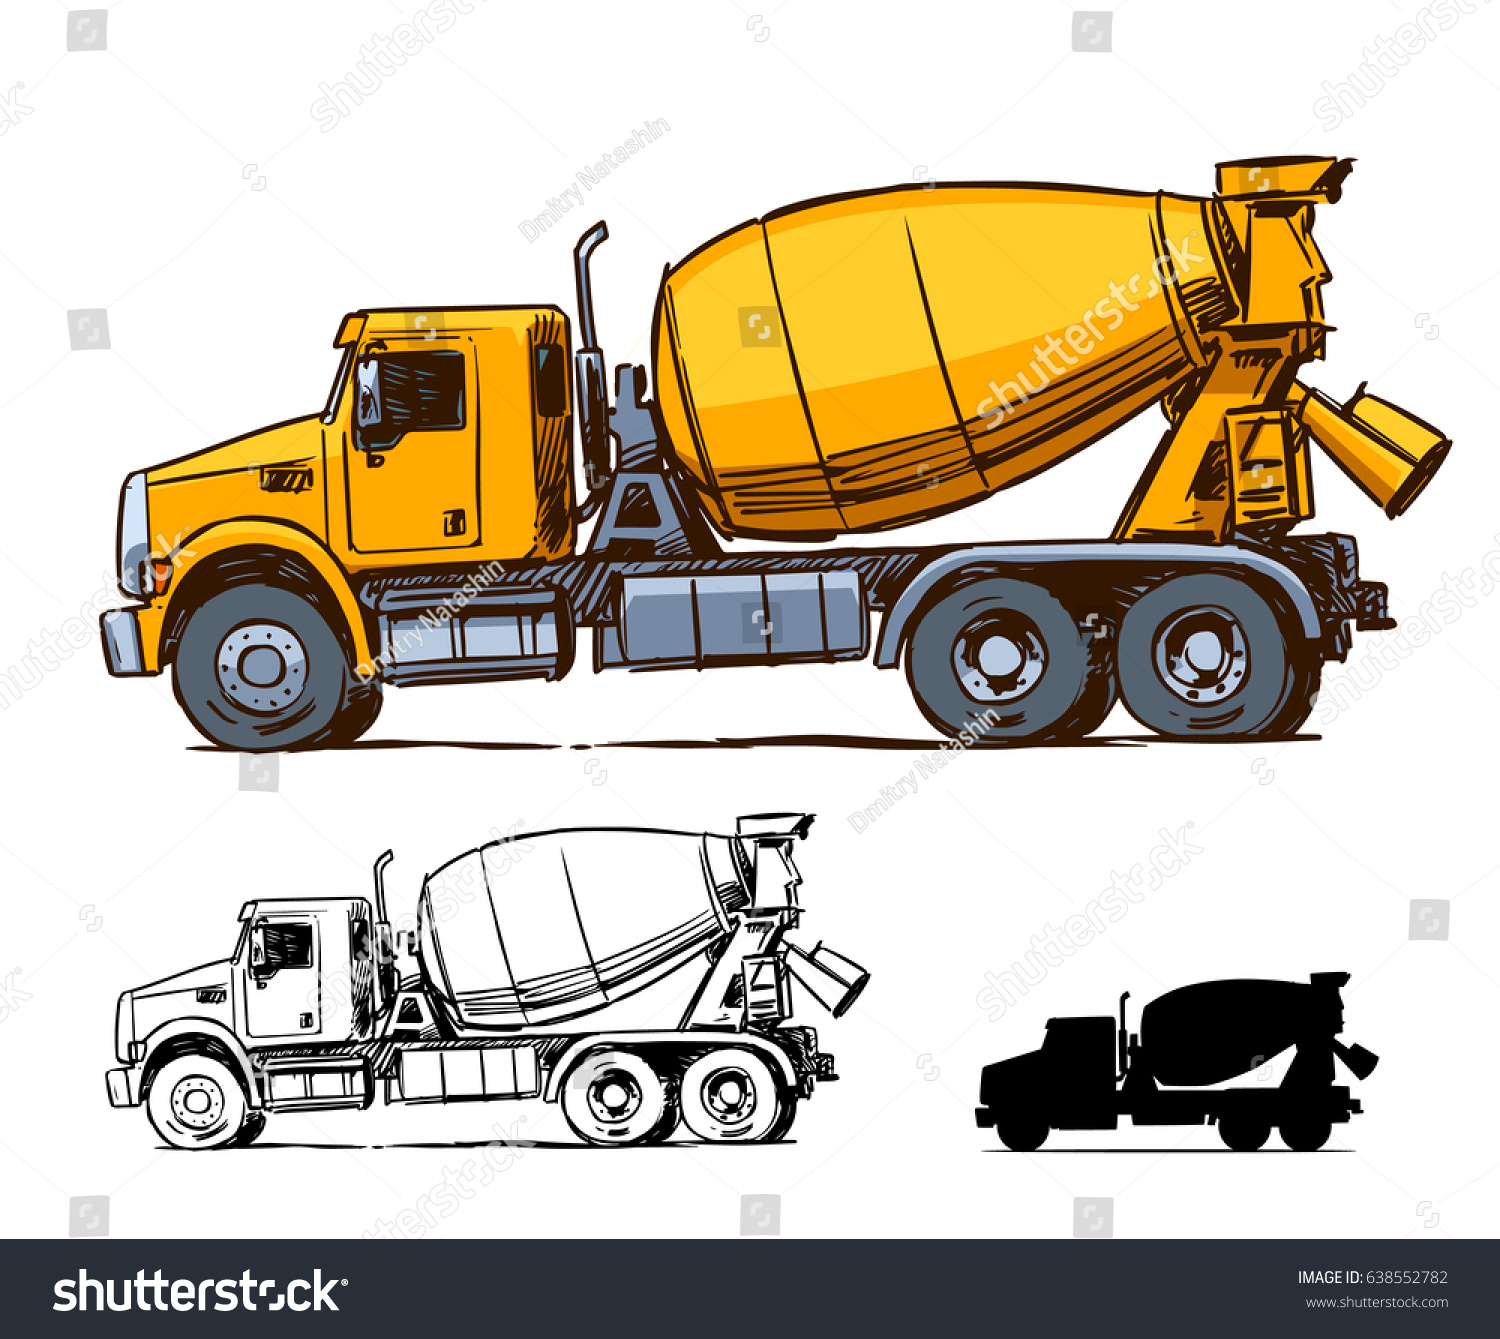 SVG of concrete mixer truck side view svg